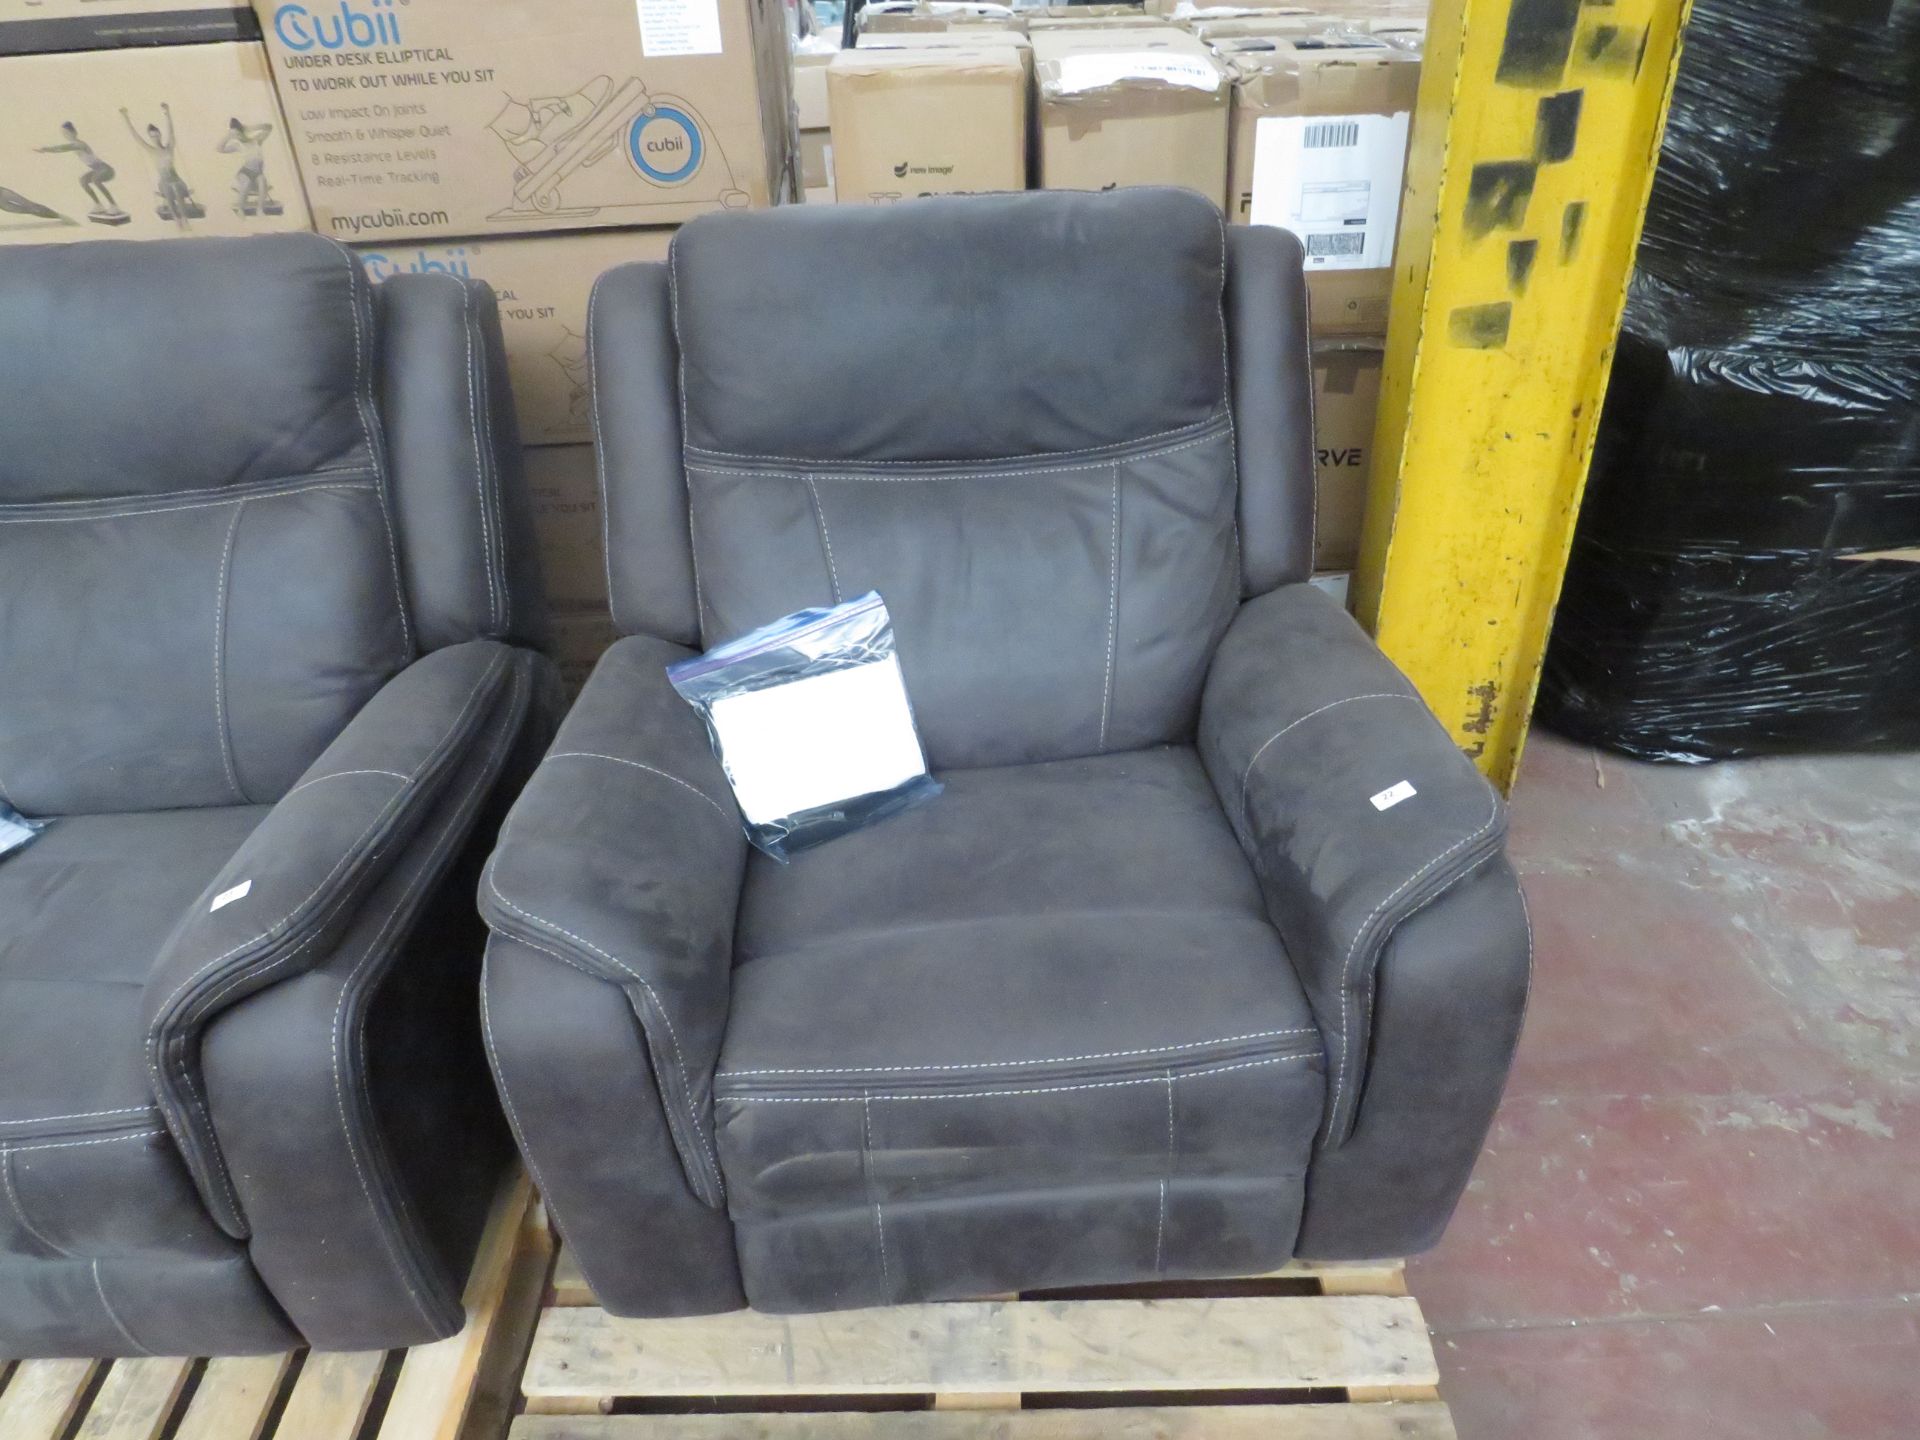 Costco leather recliner, untested but looks in good condition (no guarantee)